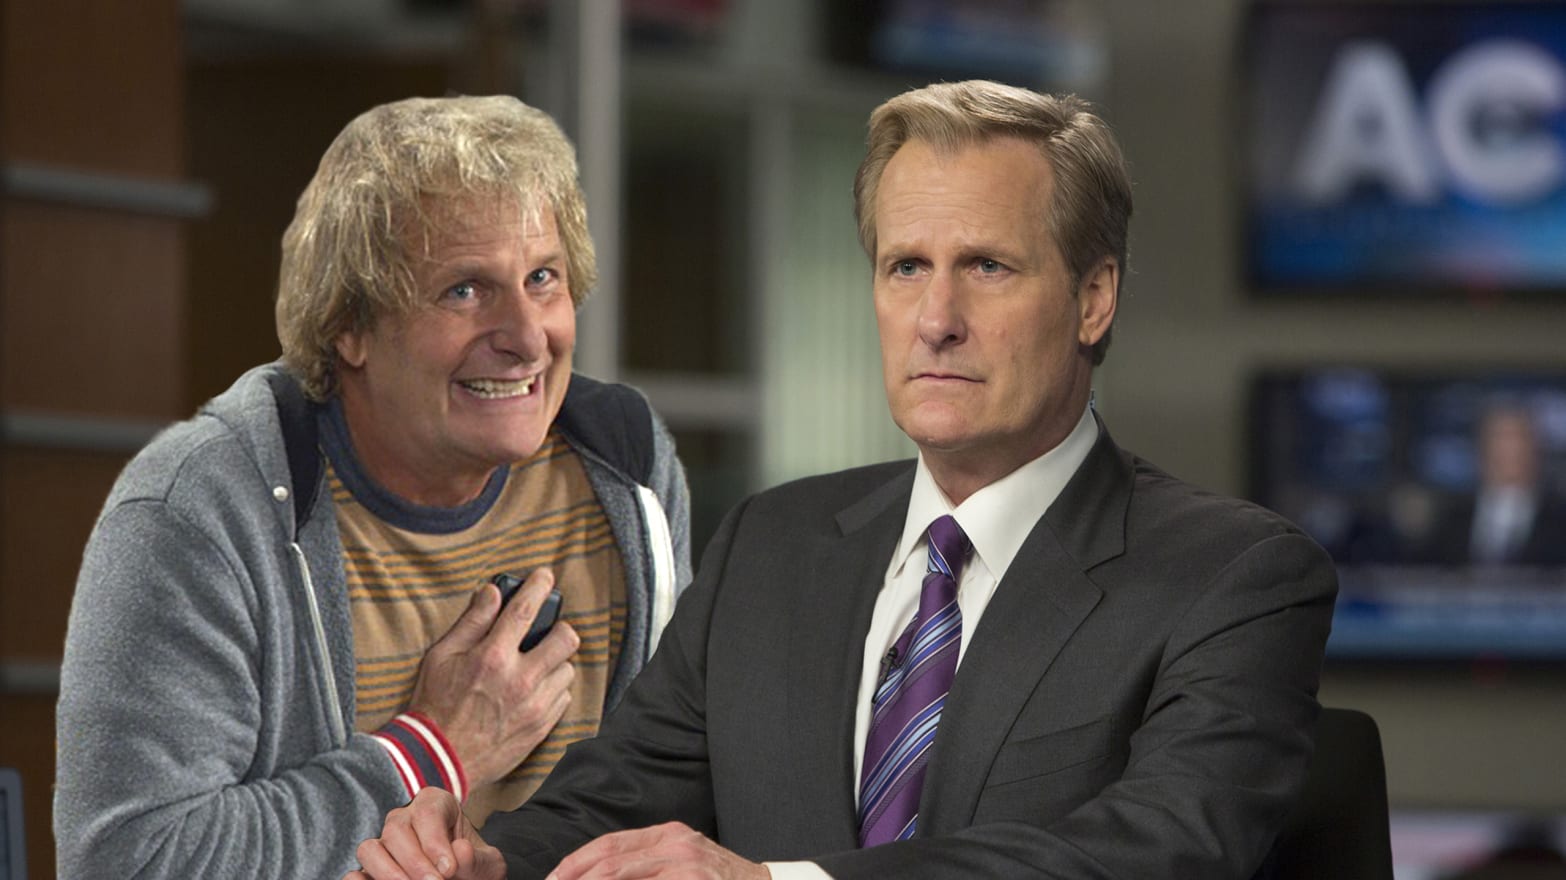 Dumb And Dumber Sex Video - Jeff Daniels Defends Aaron Sorkin and the 'Dumb and Dumber' Toilet Scene